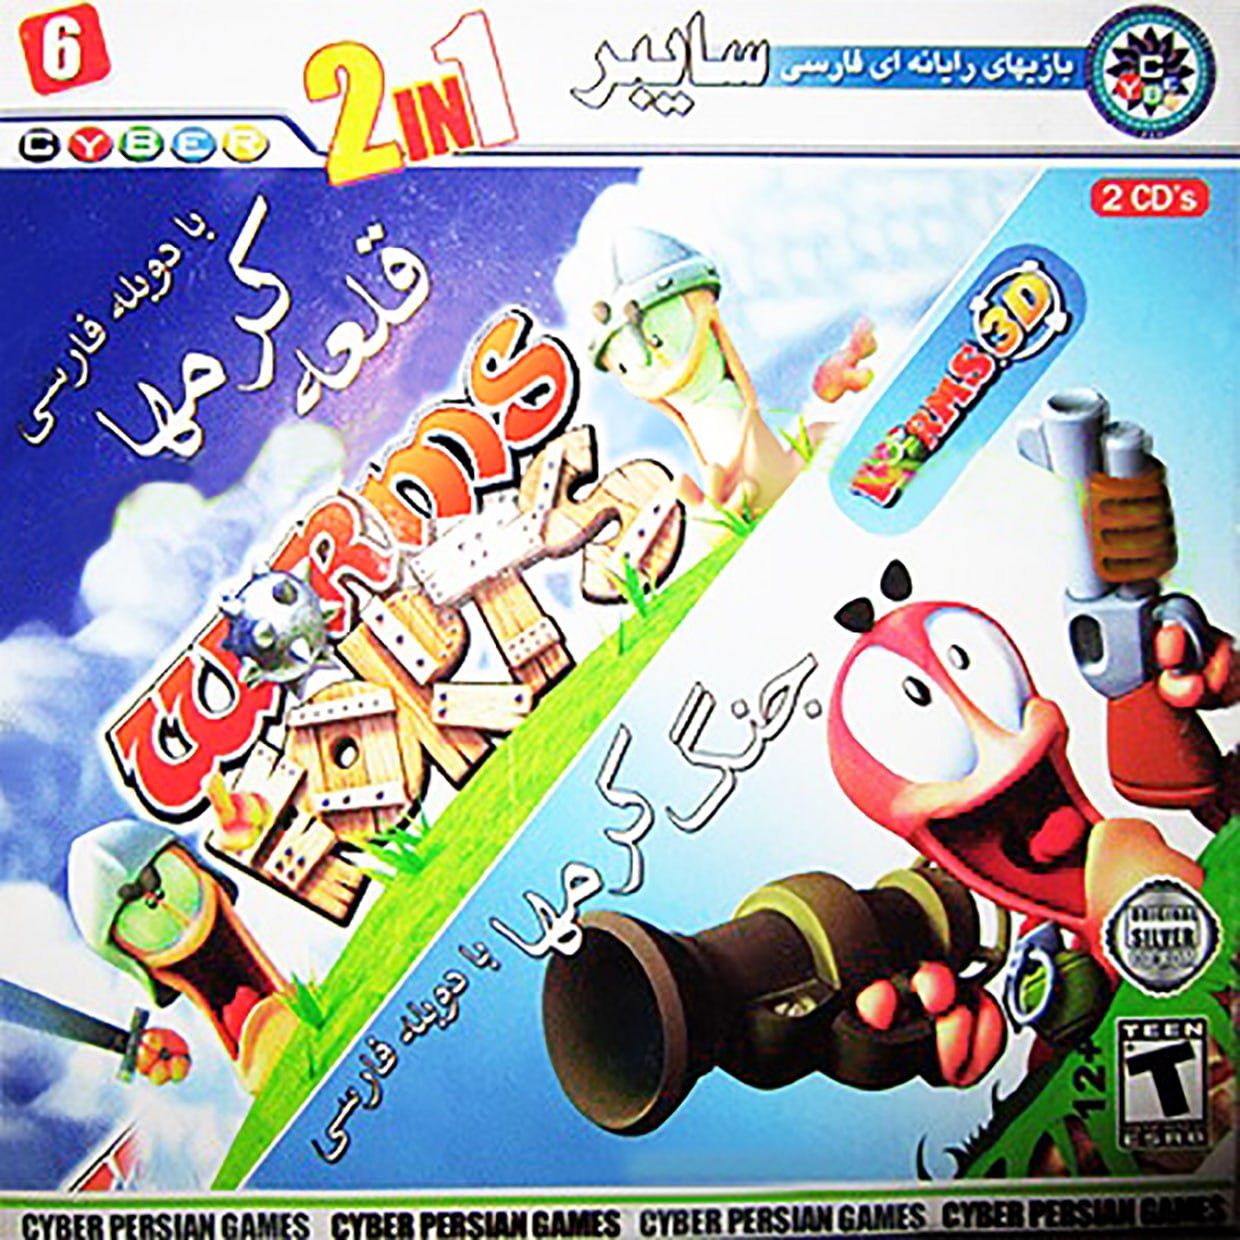 You are currently viewing دانلود بازی دوبله فارسی جنگ کرم ها ۱و۲ قلعه کرم ها Worms 3D Worms Forts Under Siege